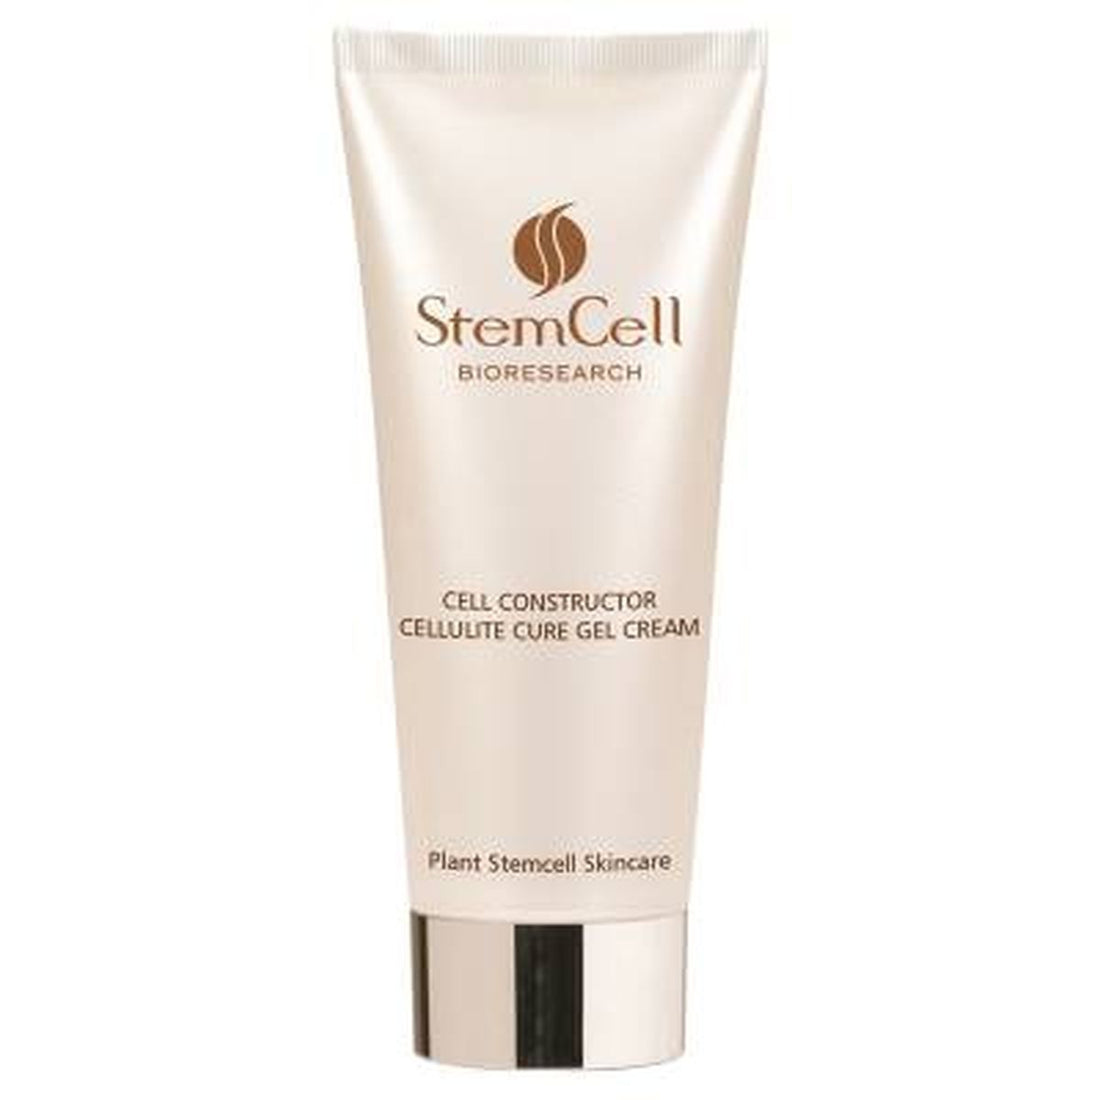 Stemcell Cell Constructor Gel curativo anticellulite Crema 200ml